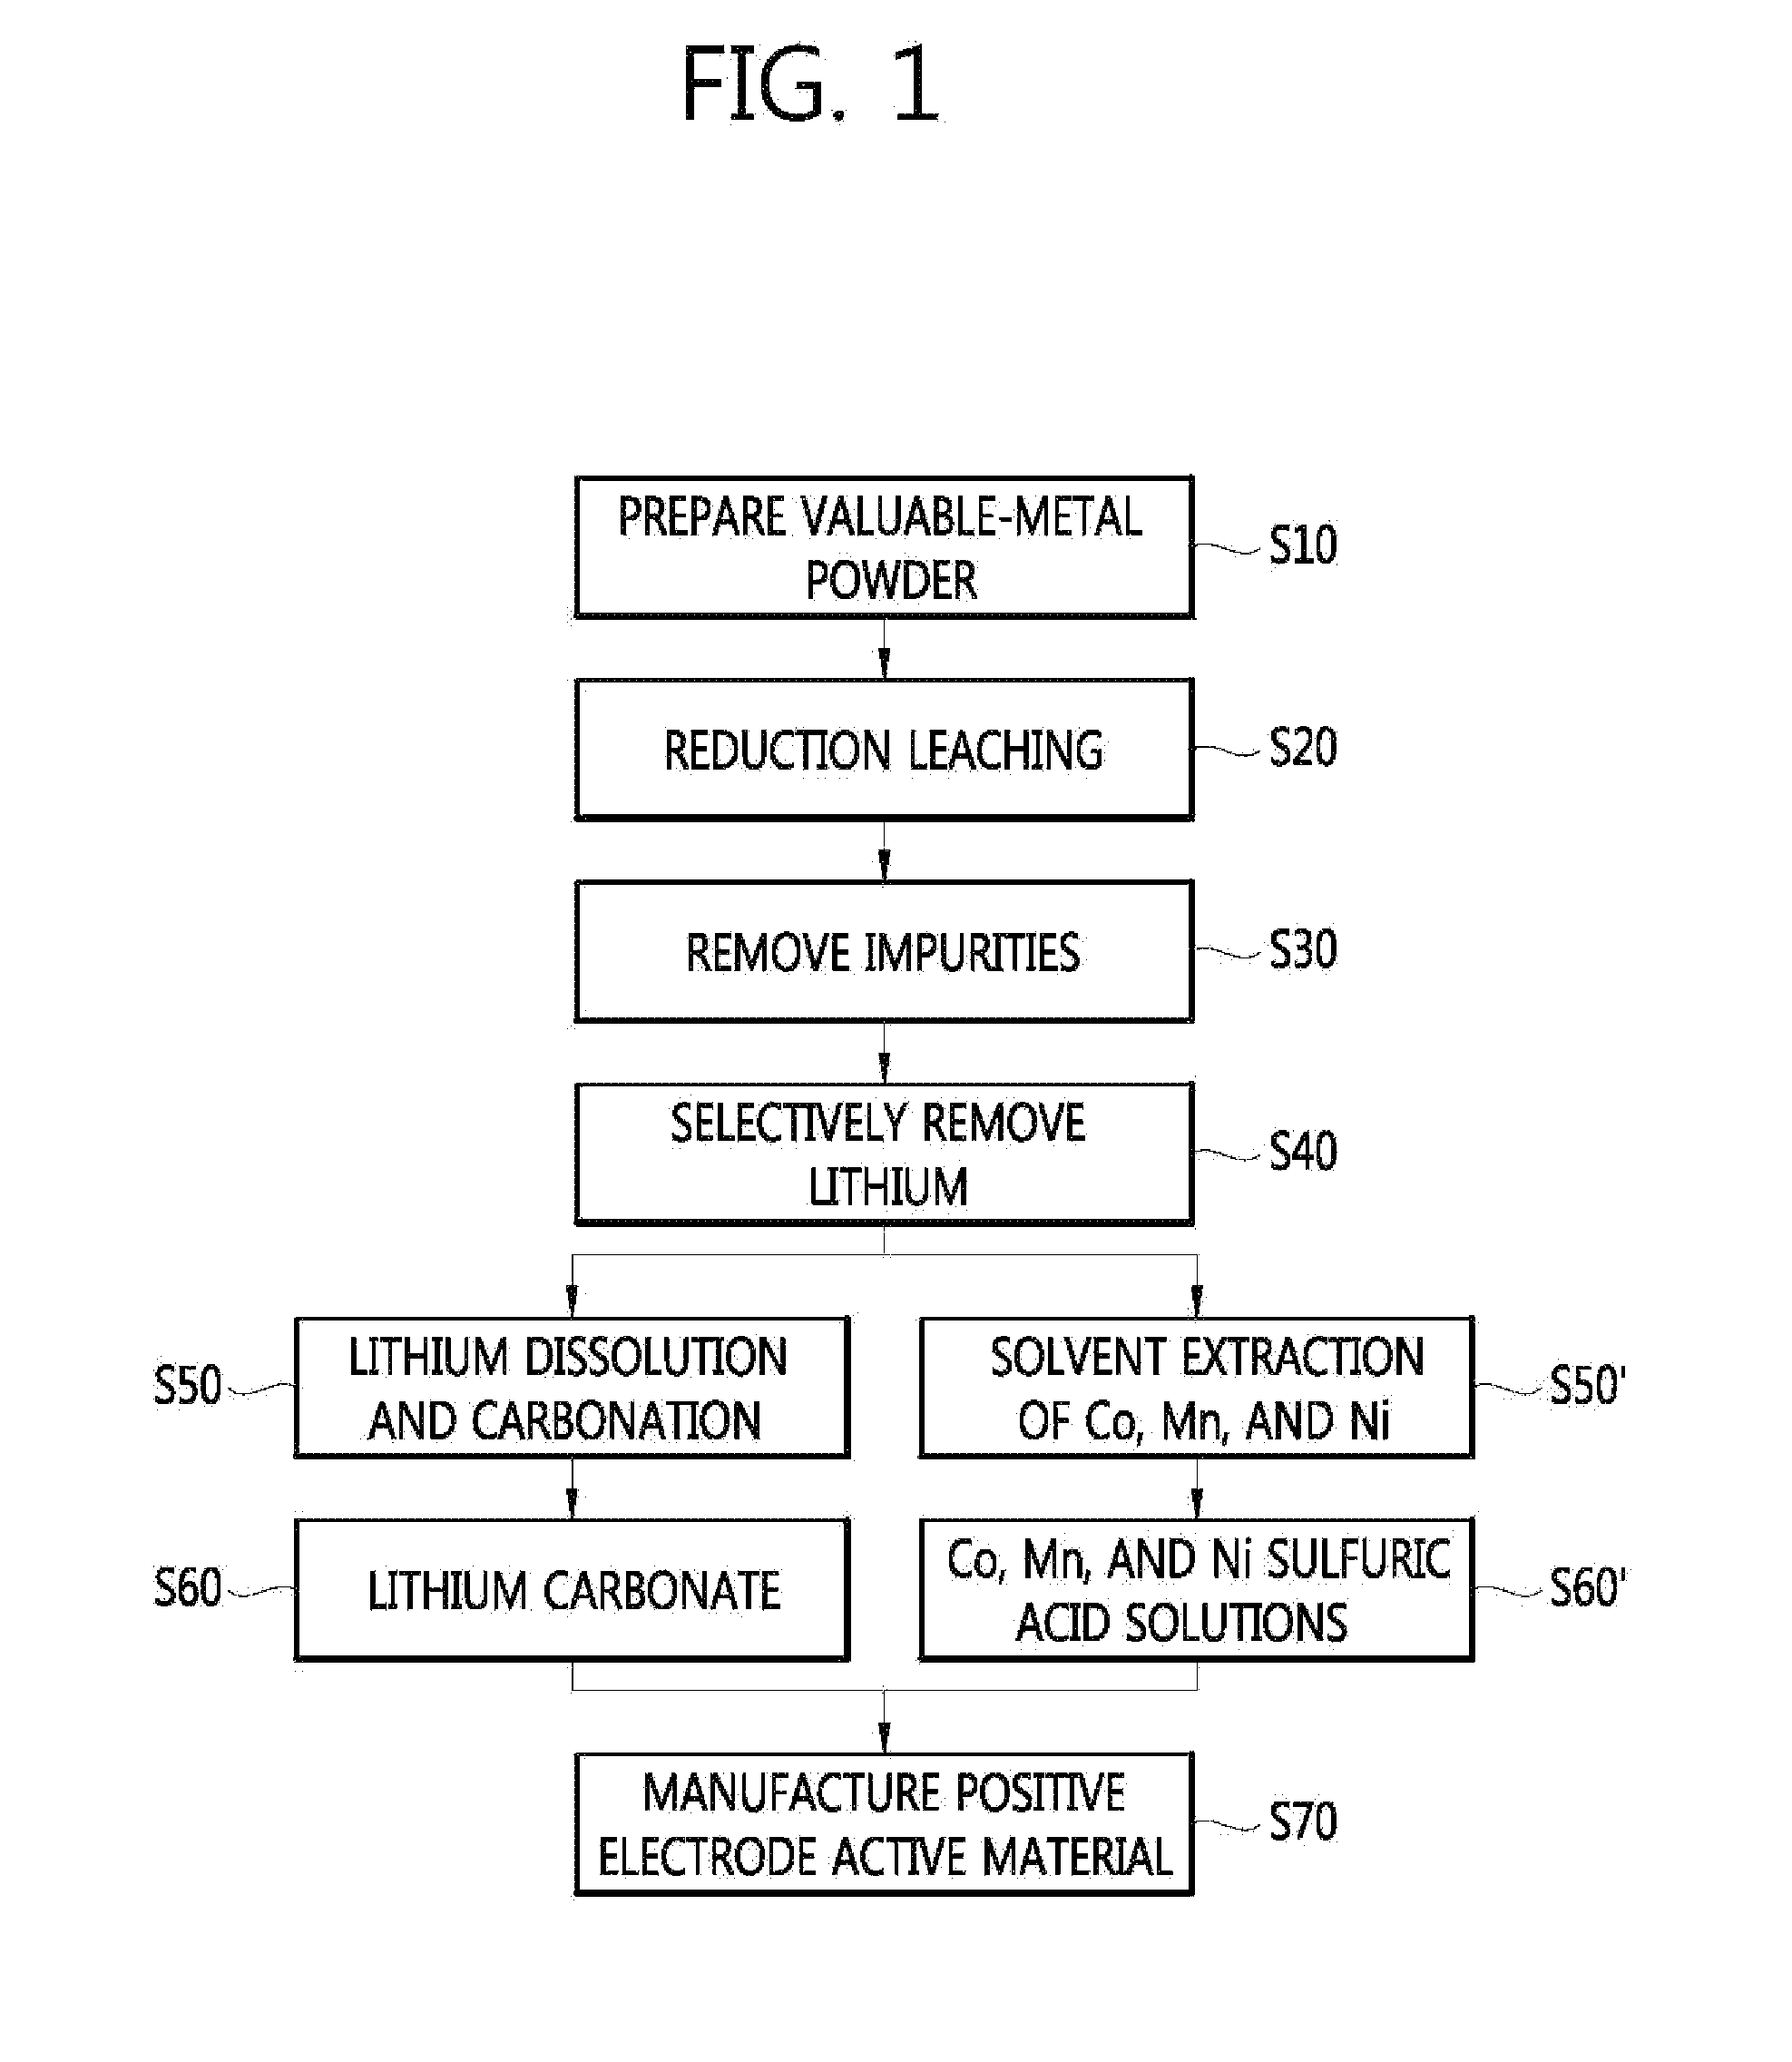 Method for manufacturing a valuable-metal sulfuric-acid solution from a waste battery, and method for manufacturing a positive electrode active material